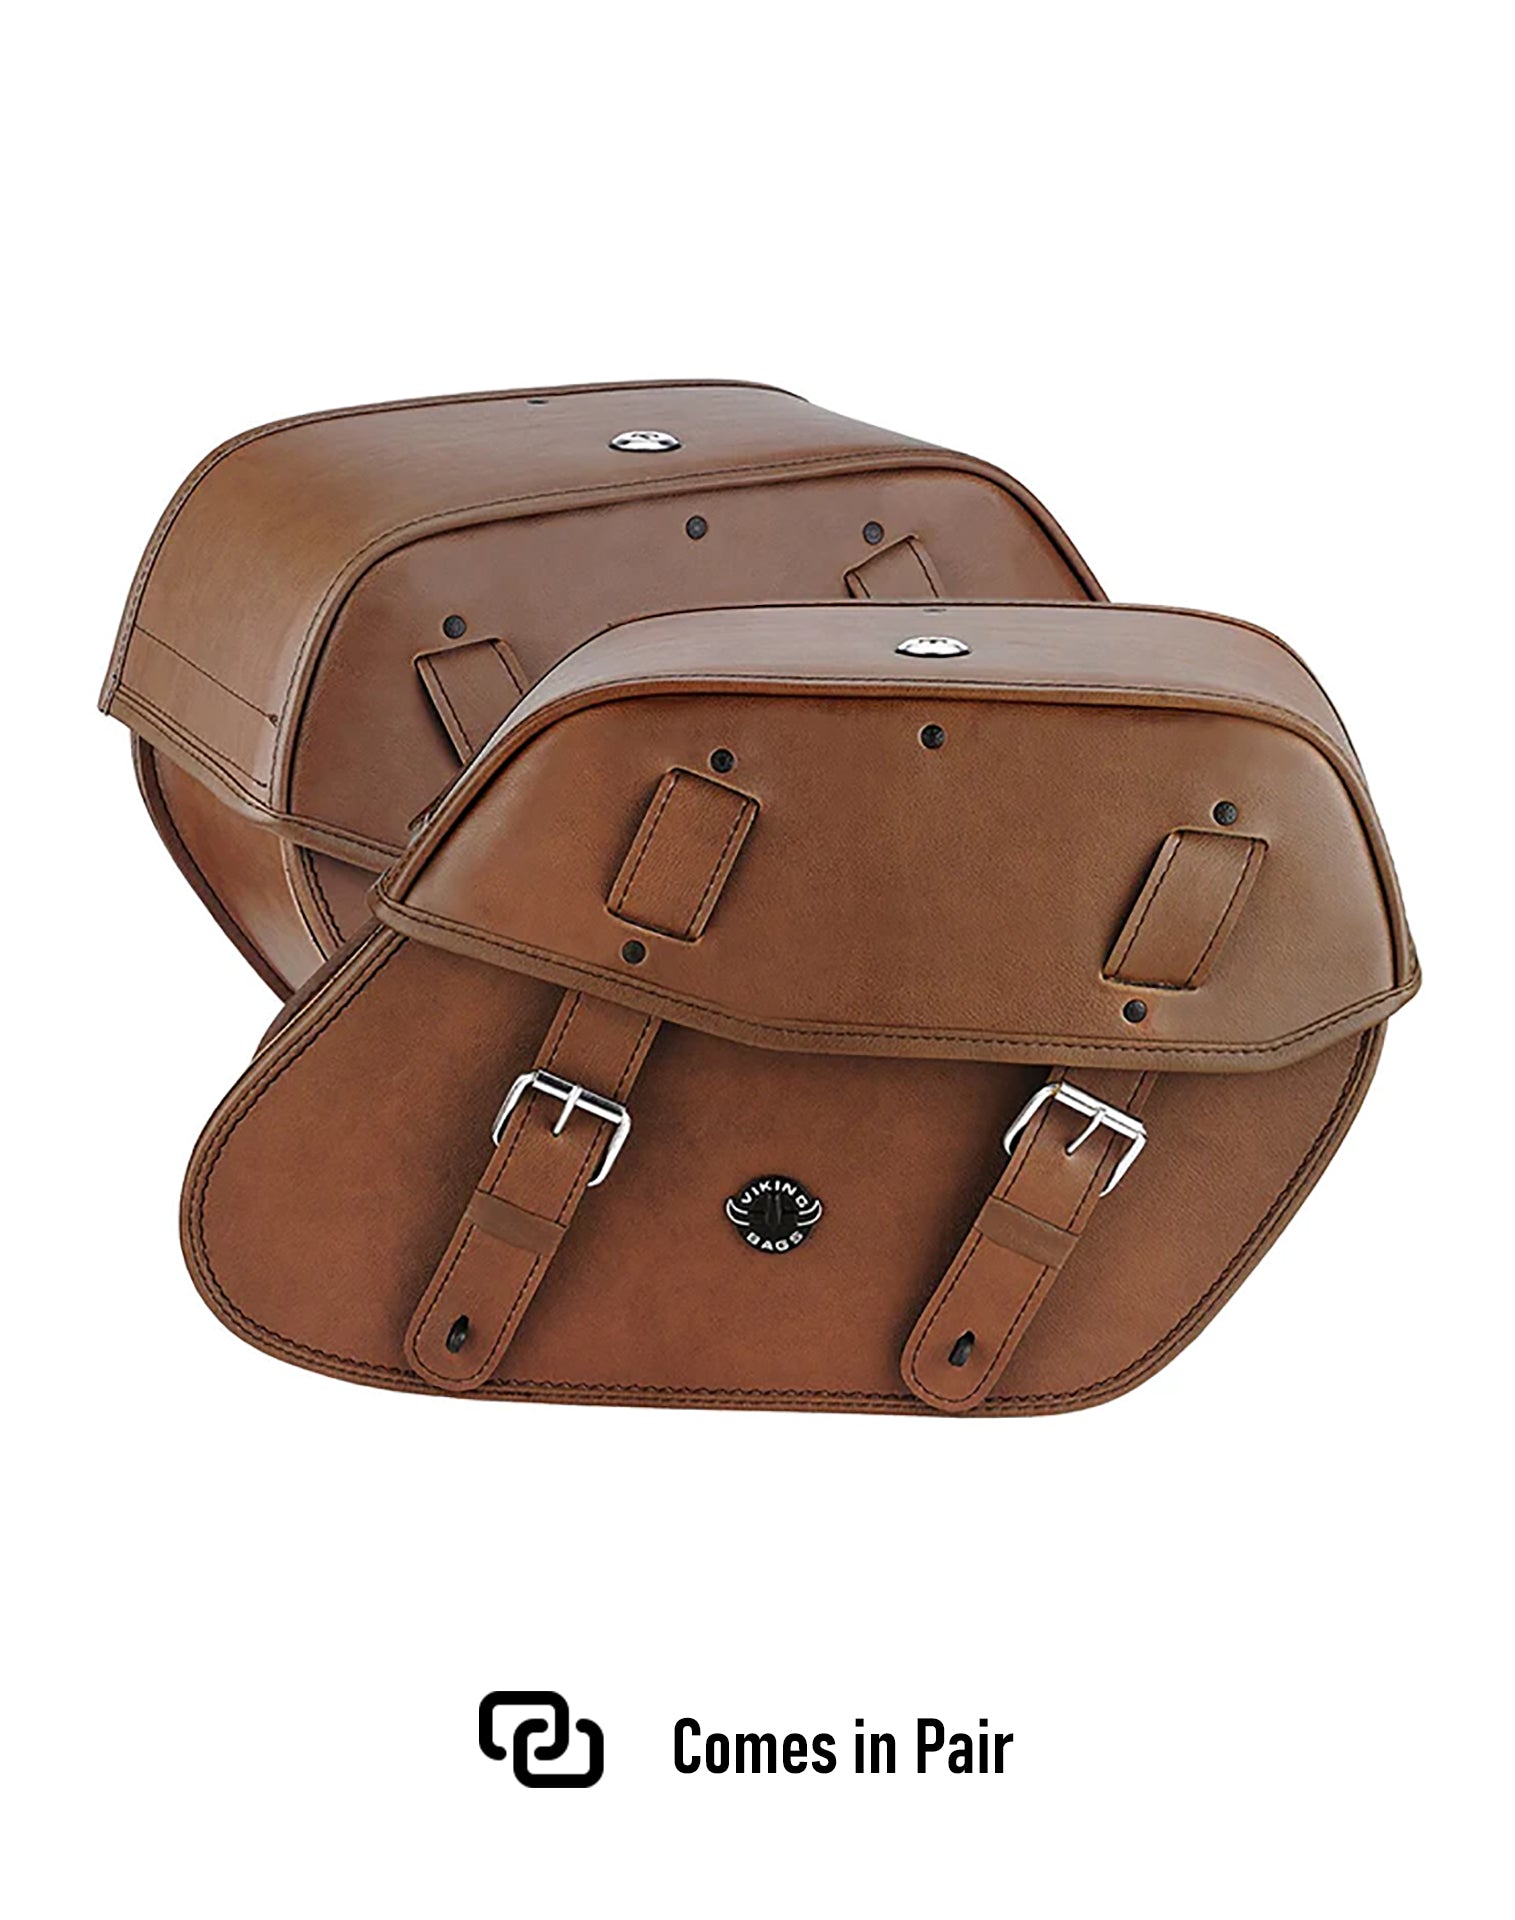 Viking Odin Brown Large Suzuki Boulevard C109 Leather Motorcycle Saddlebags Weather Resistant Bags Comes in Pair